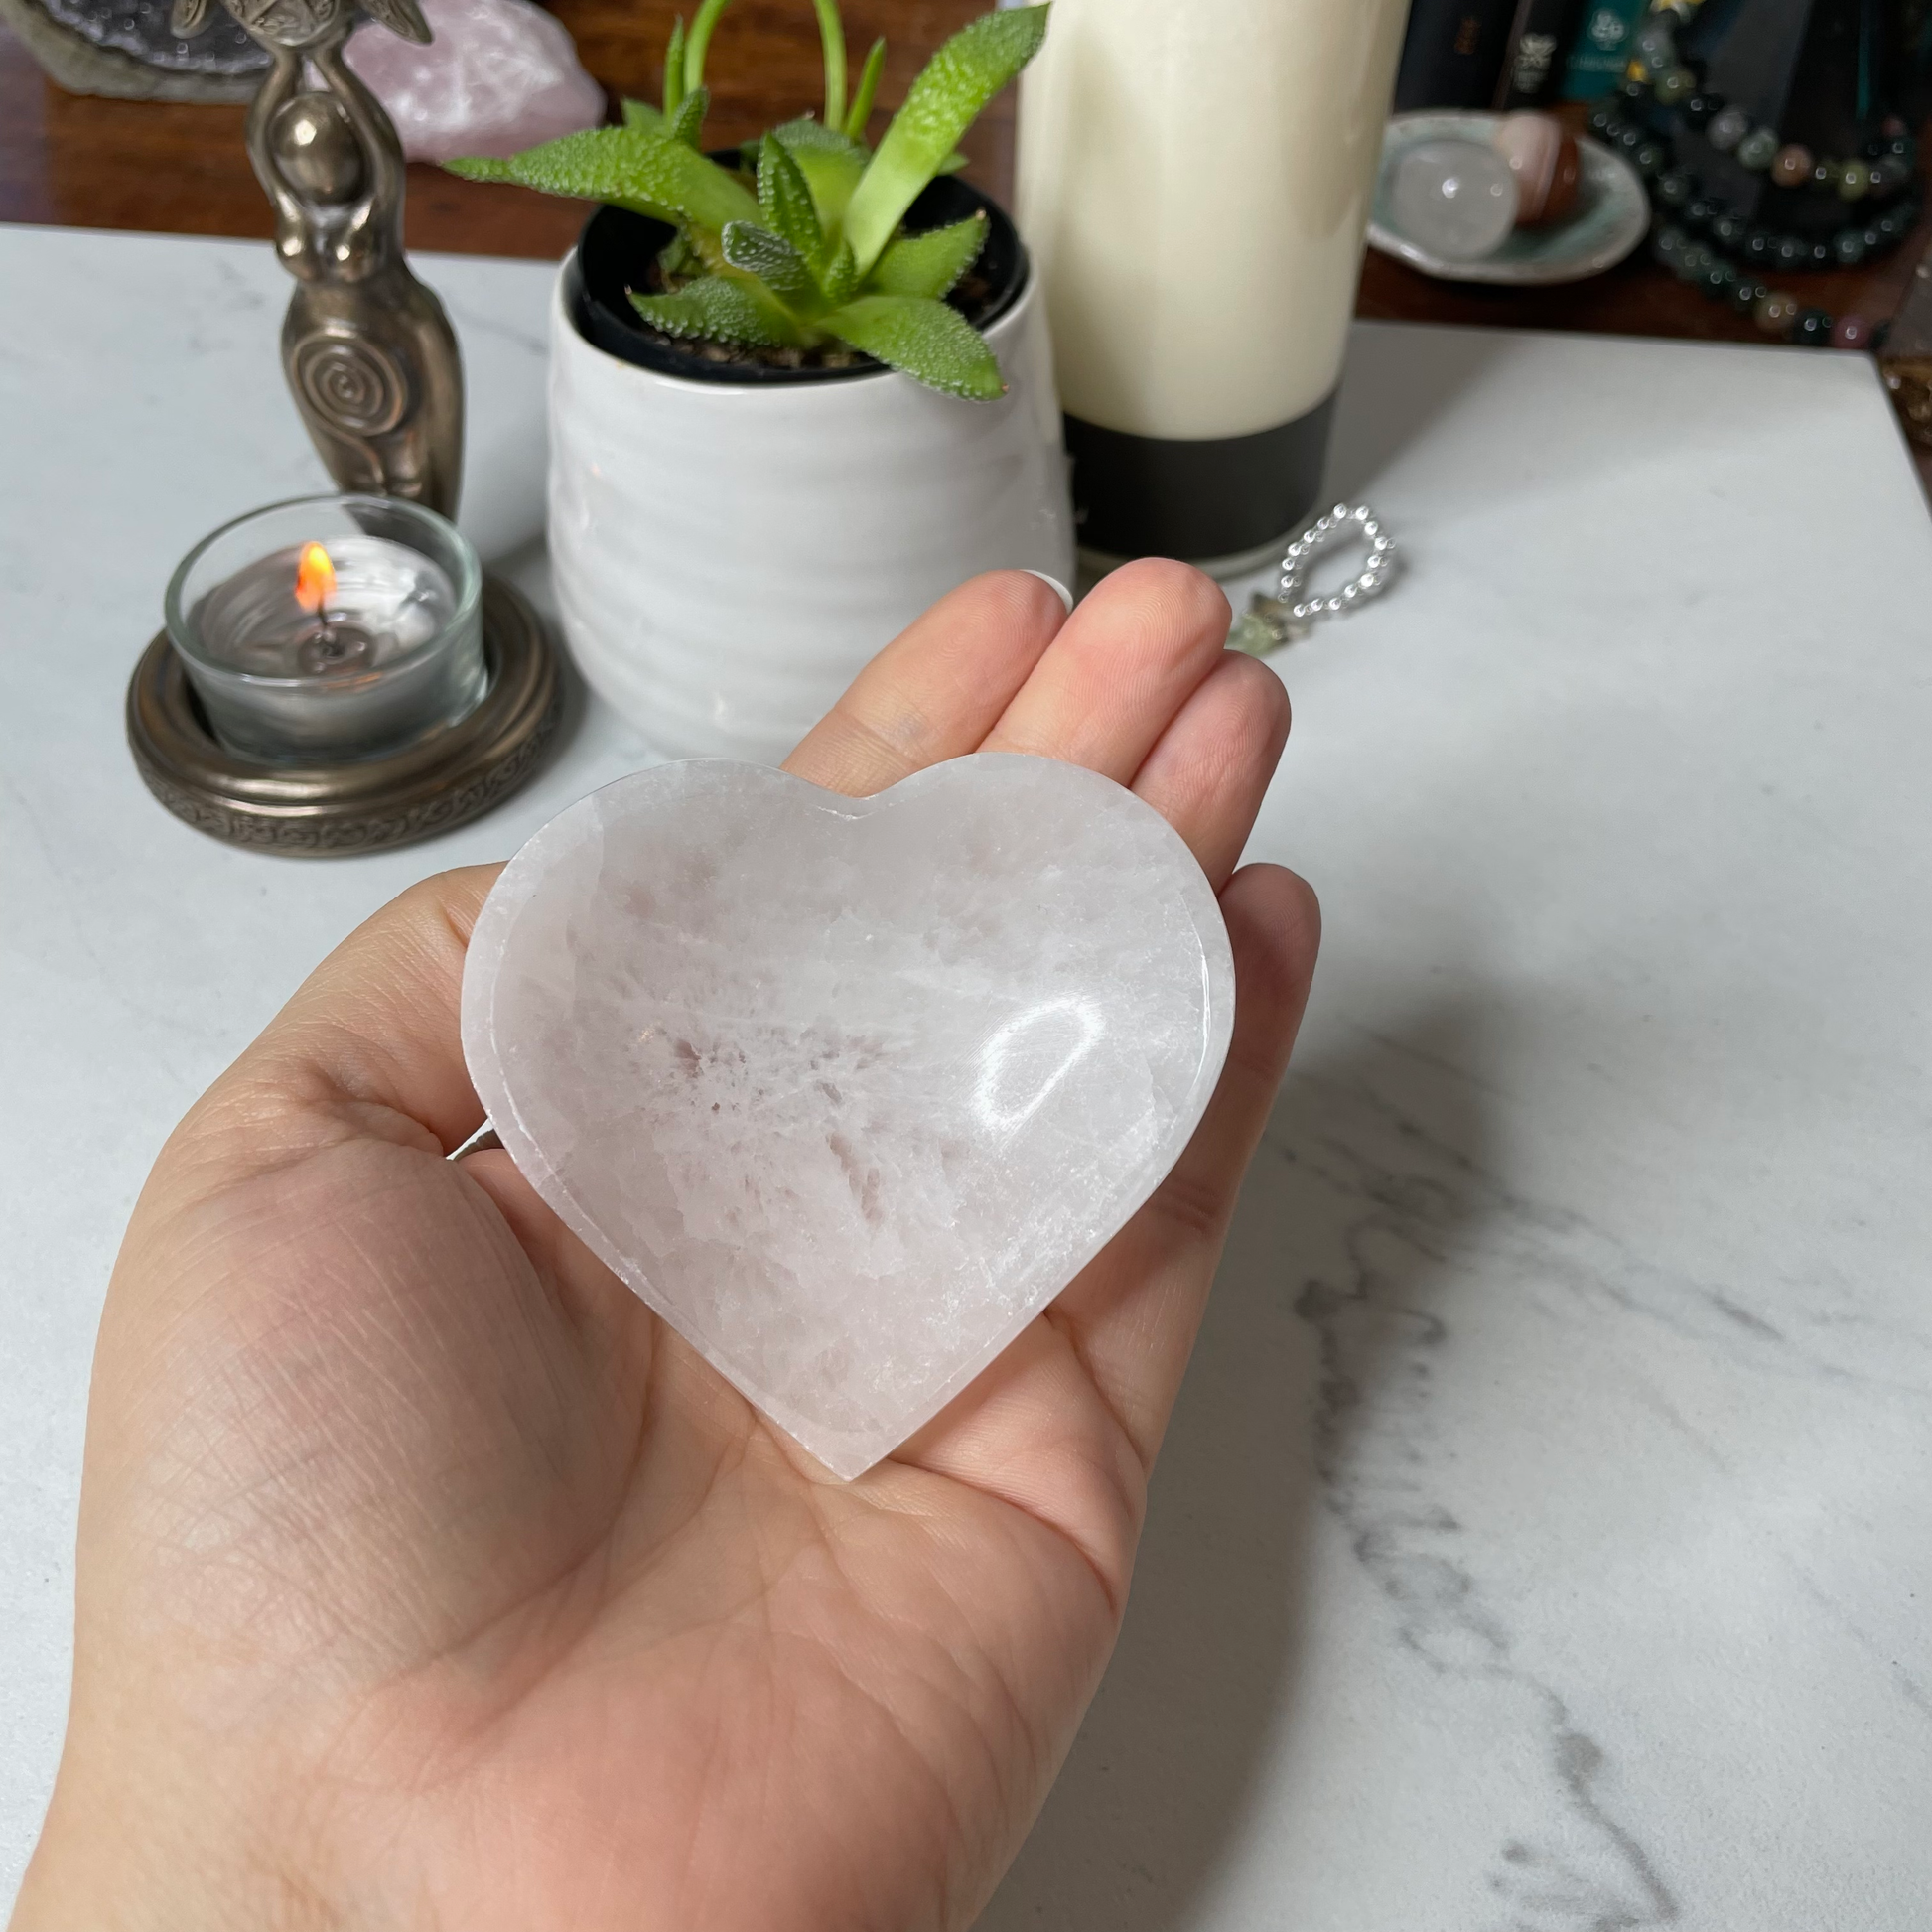 Freya's Haven | Metaphysical & Crystal shop | A close up photo of  a heart-shaped Selenite bowl held in a woman's hand with candles in the background.